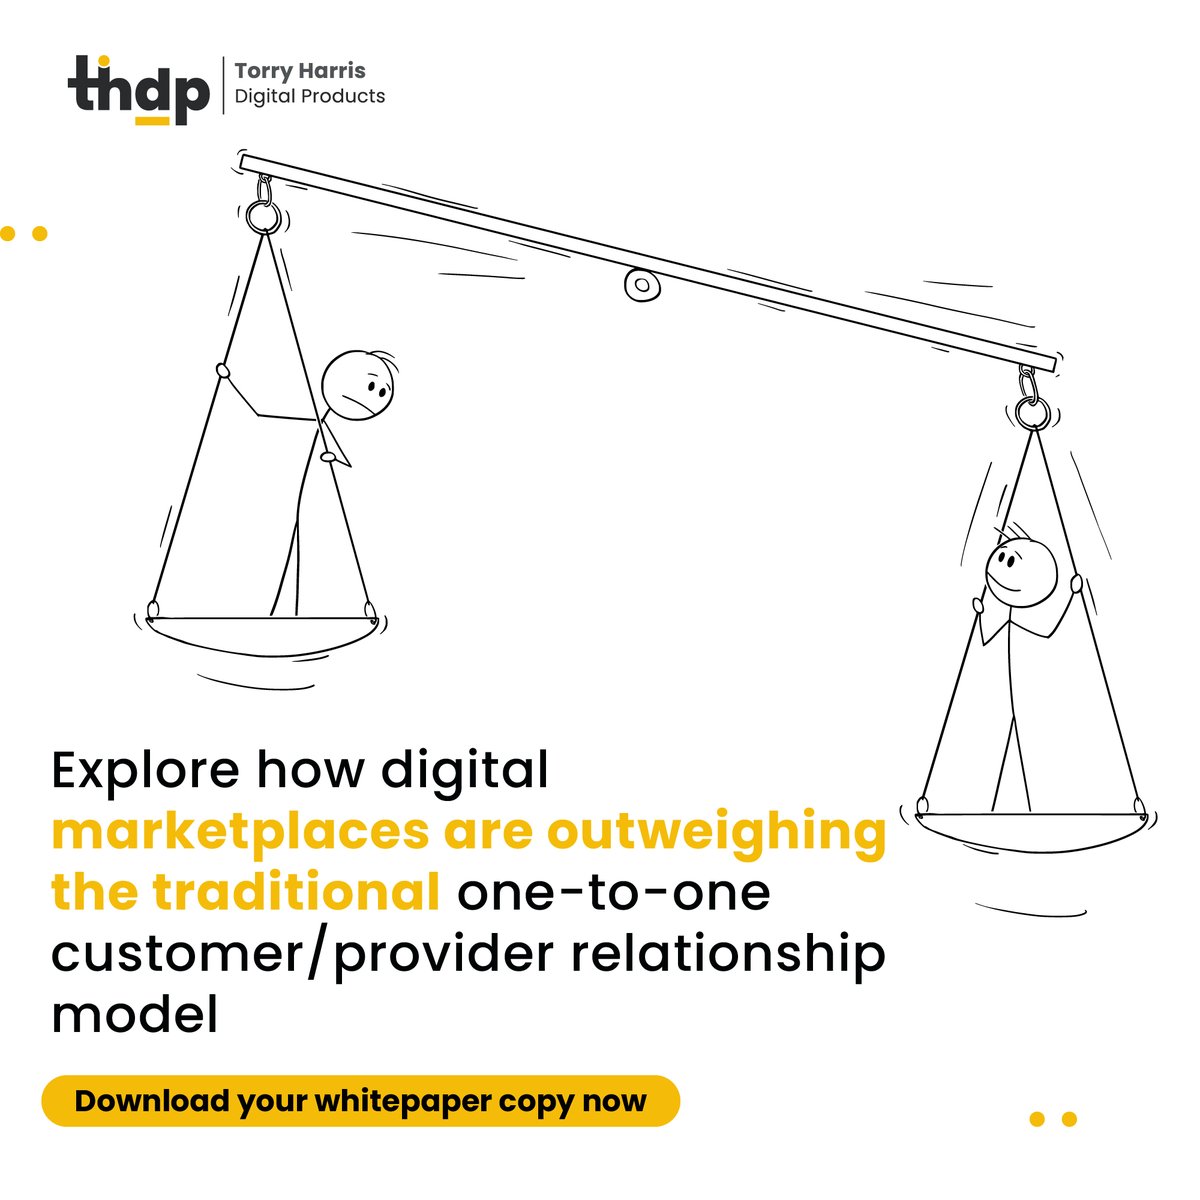 Discover game-changing strategies to unlock the full potential of #ROI in digital marketplaces.

Don't miss out on our latest whitepaper, download your copy now. torryharrisproducts.com/insights/white…

#DigitalMarketplace #Whitepaper #ReturnonInvestment #THDP